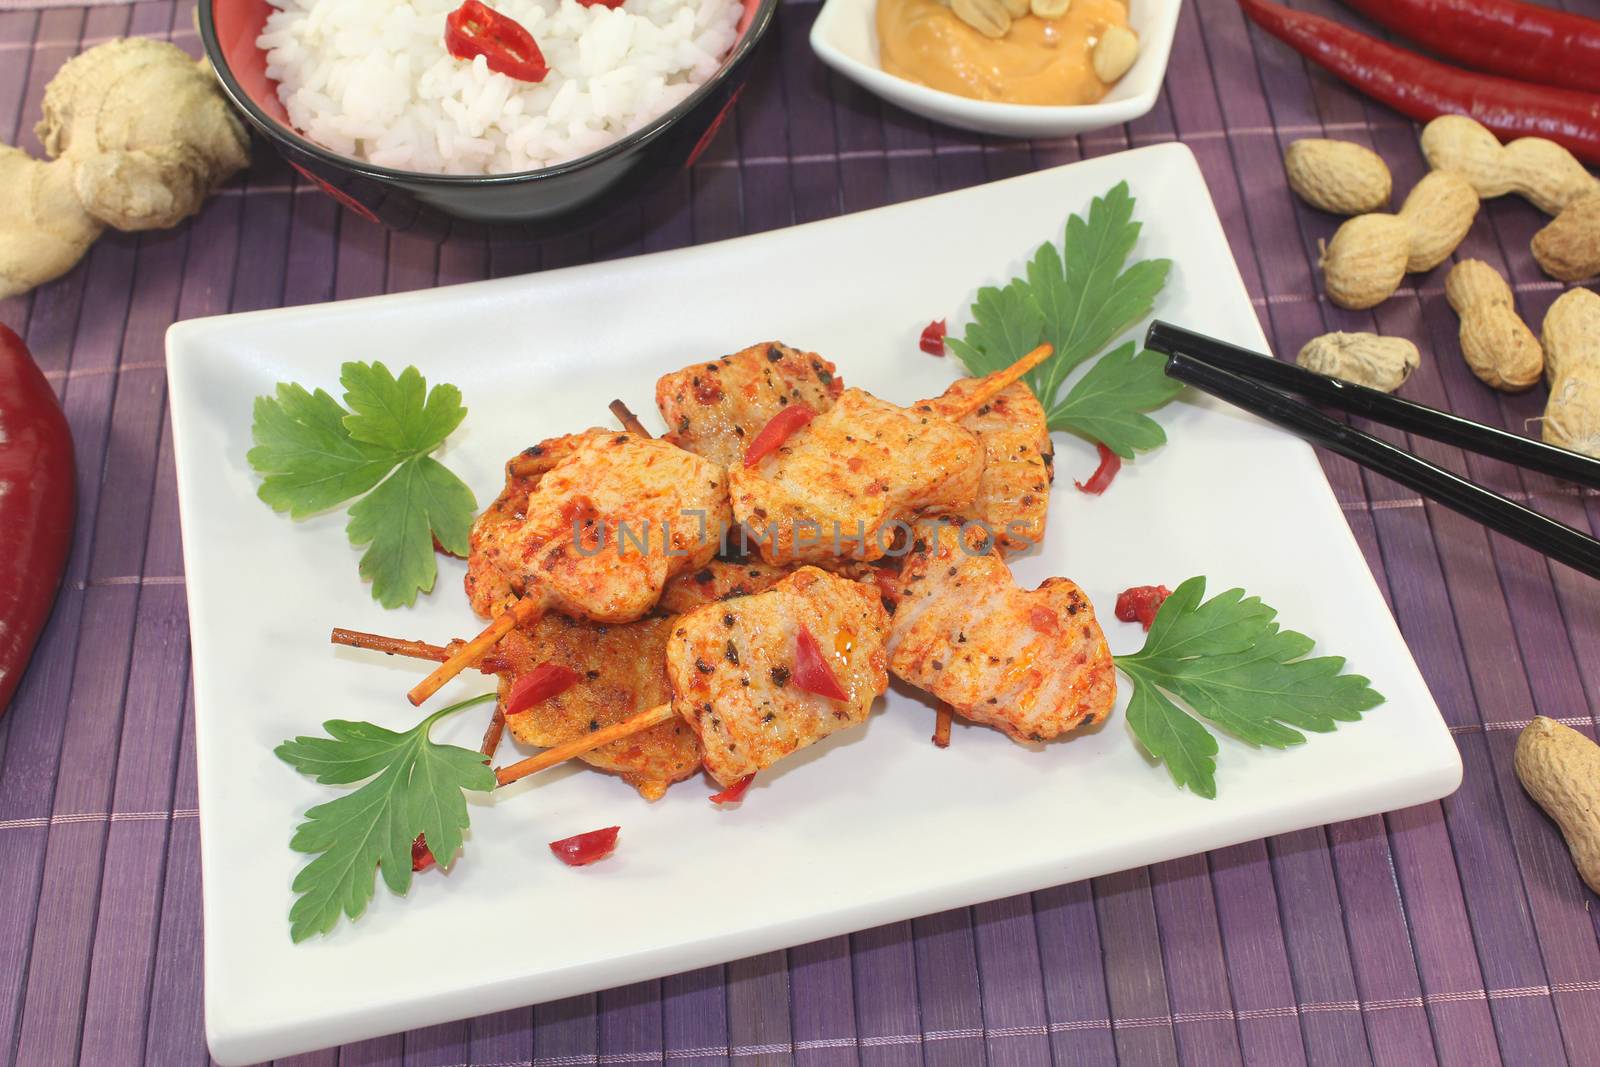 Asian satay skewers with rice, chili, peanut sauce and parsley